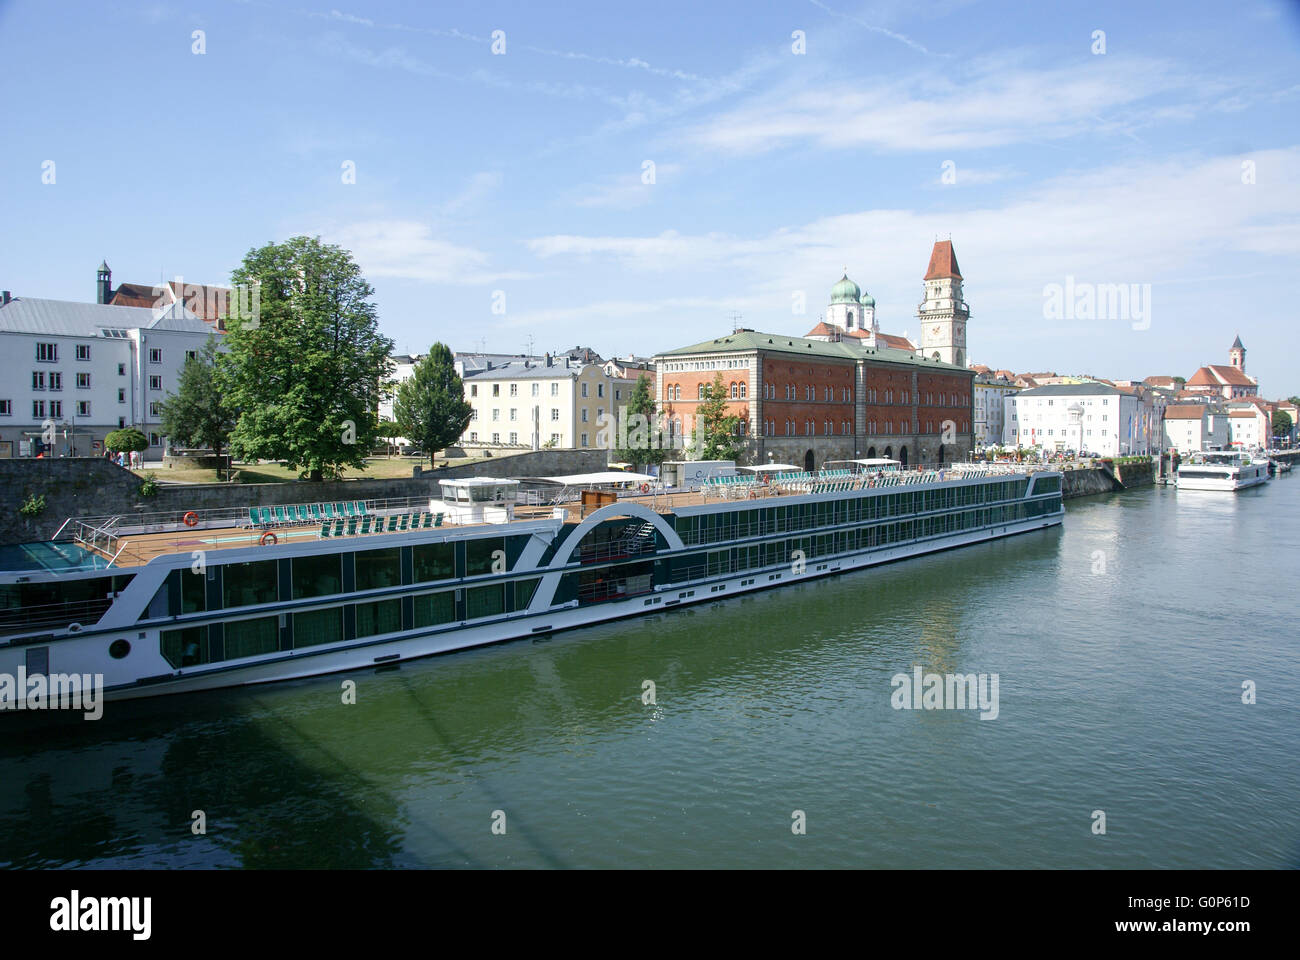 River cruise stop in Passau, Lower Bavaria, Germany, City of three rivers Stock Photo